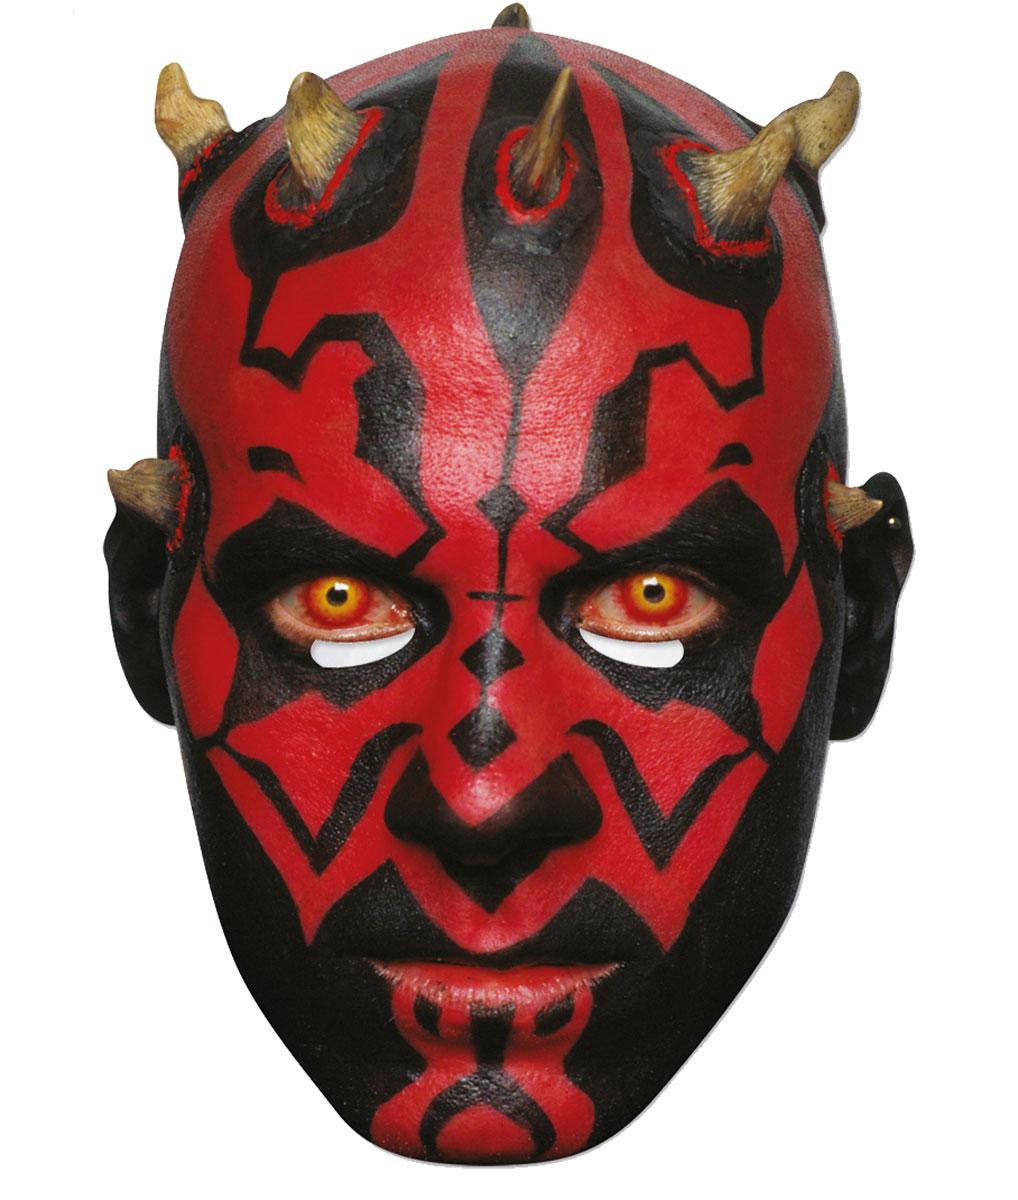 Star Wars Darth Maul Face Mask by Mask-erade 39293 and available here at Karnival Costumes online party shop